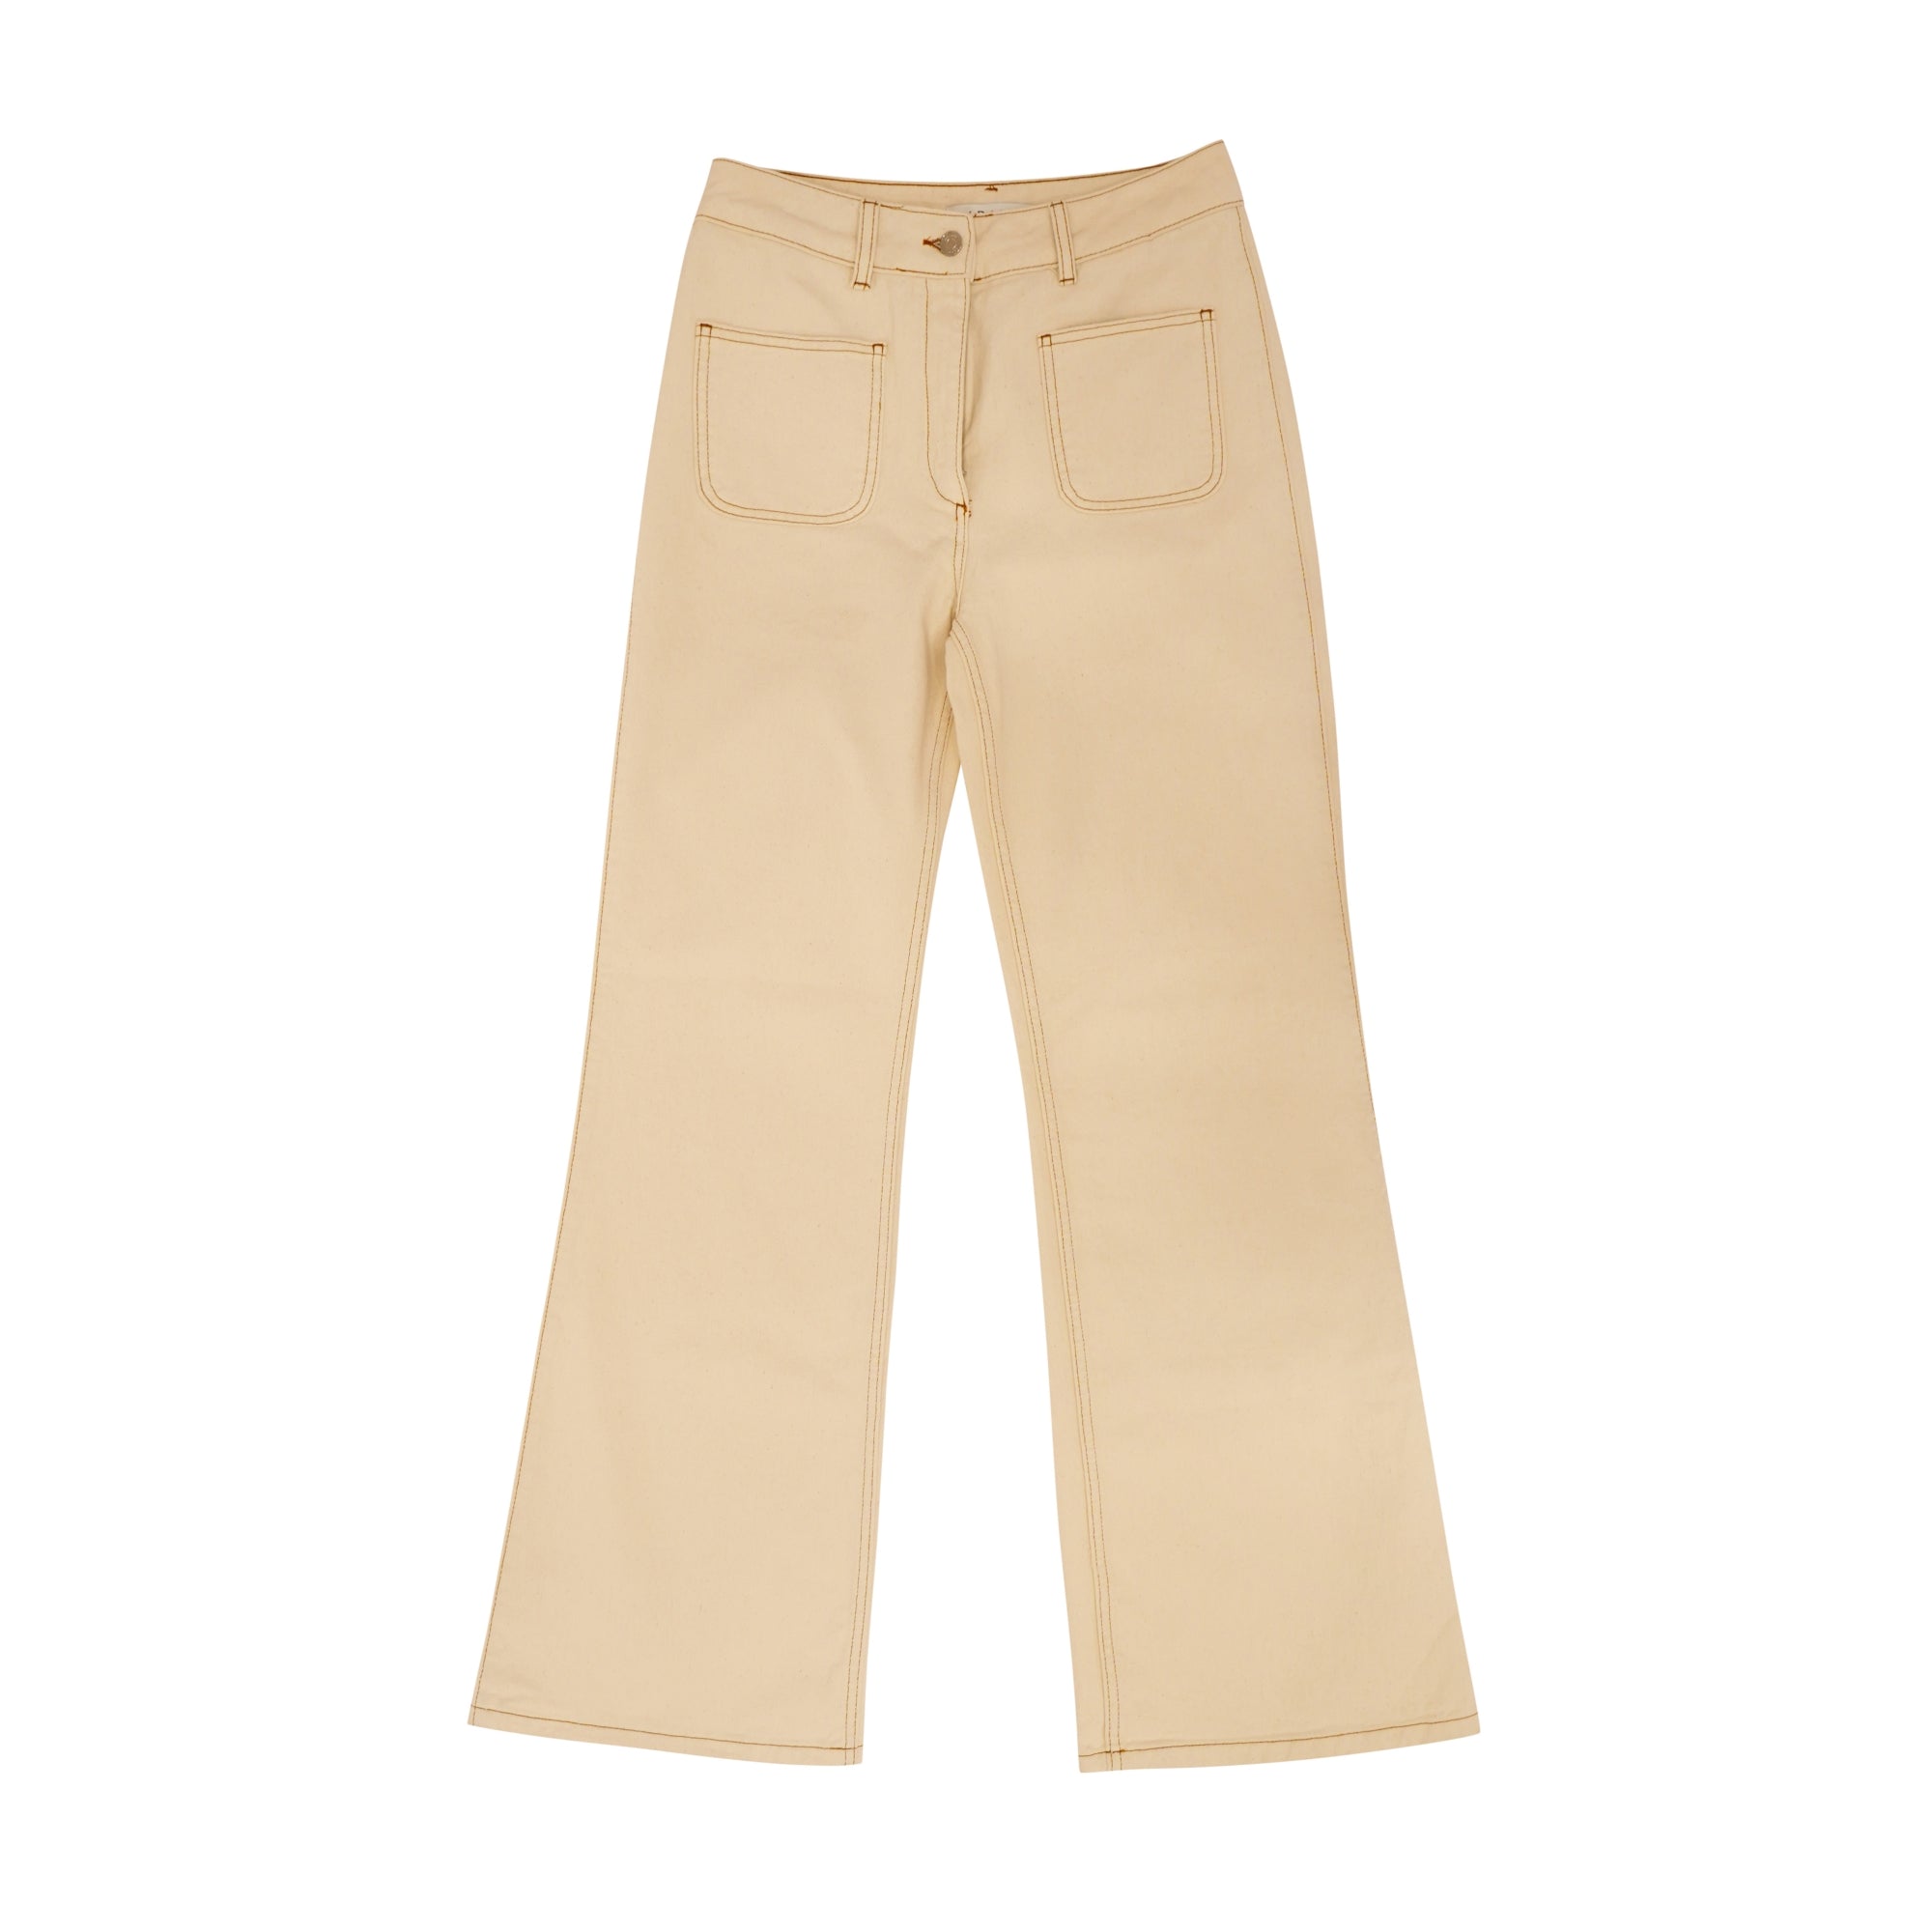 Desert Chic High-Waisted Twill Jeans